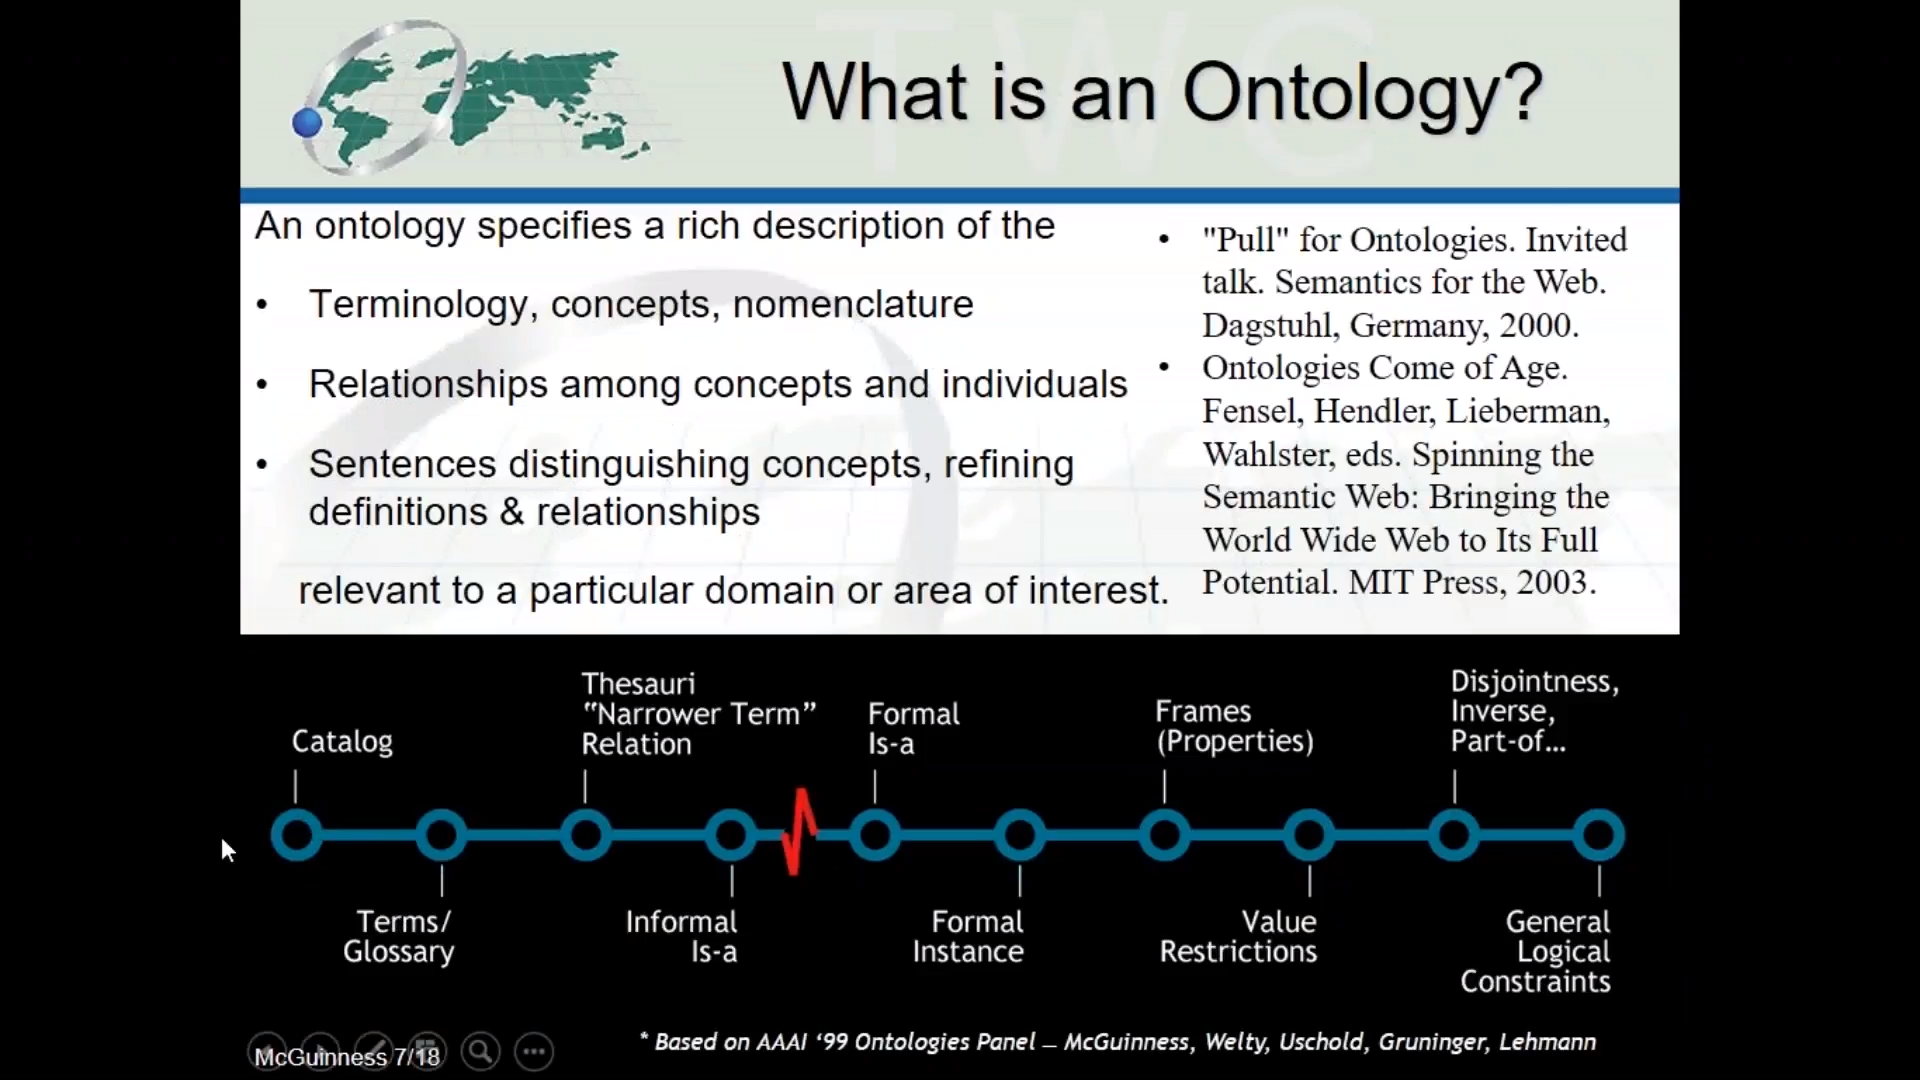 Building, Using, and Maintaining Ontology-enabled Resources